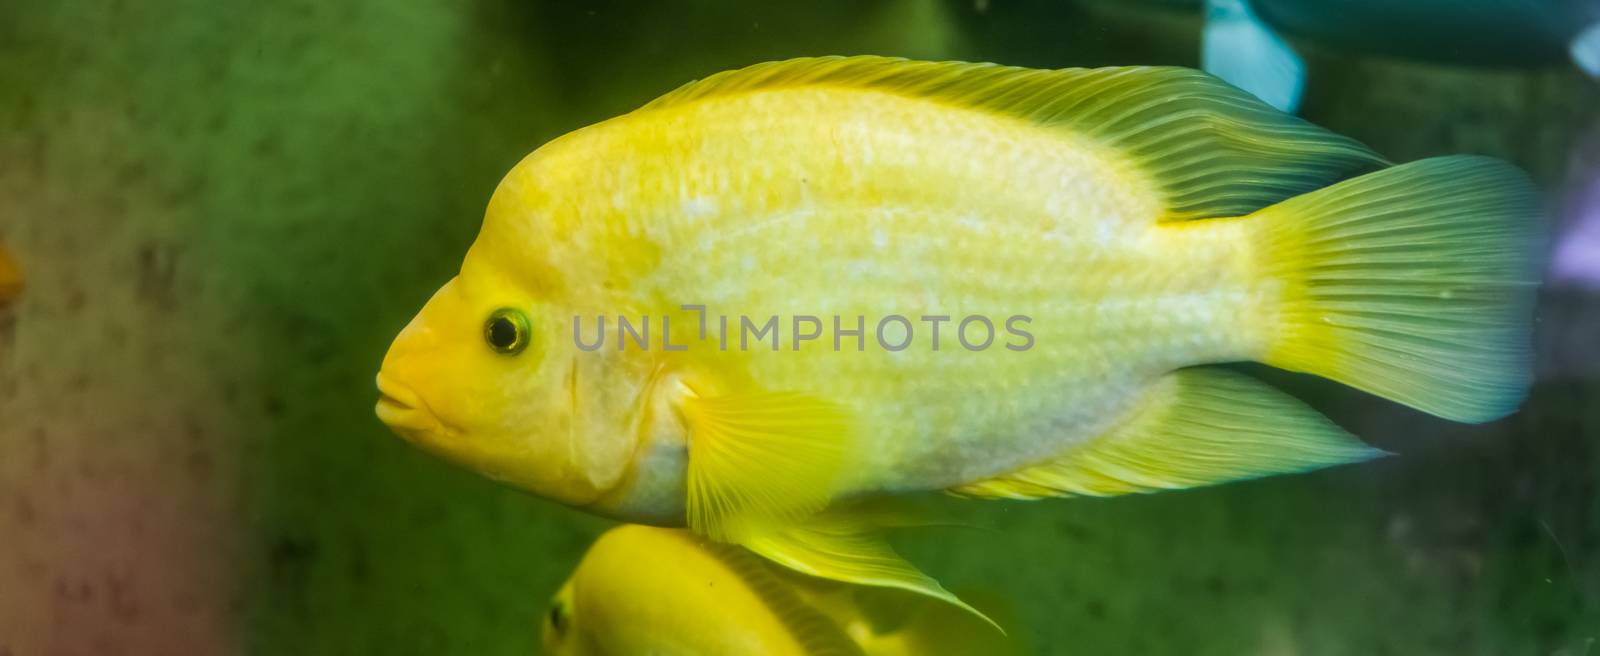 Midas cichlid in closeup, Yellow and white colored tropical fish, Exotic fish specie from Costa rica by charlottebleijenberg